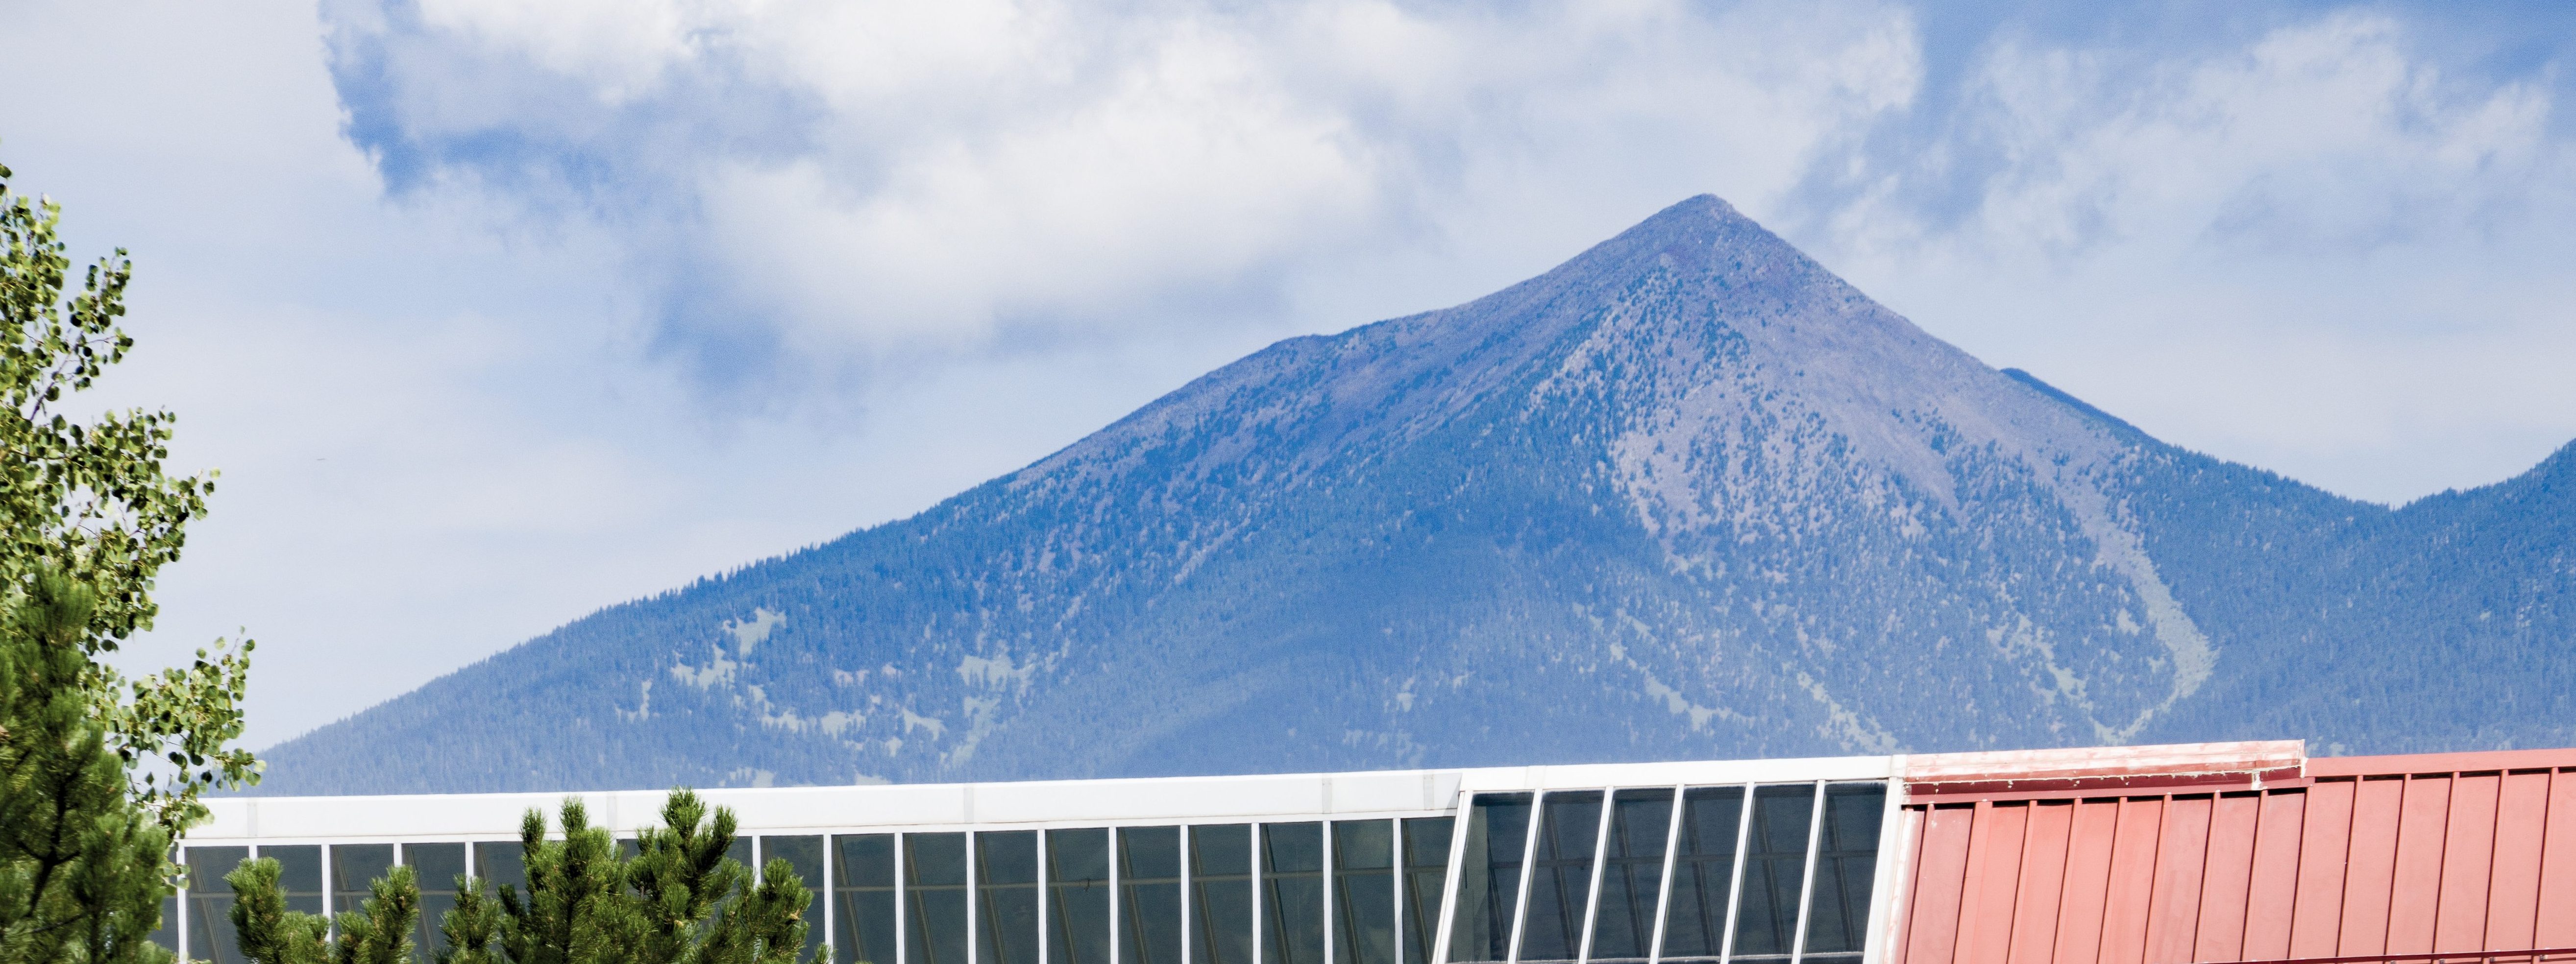 The San Francisco Peaks are seen over the Student Union.